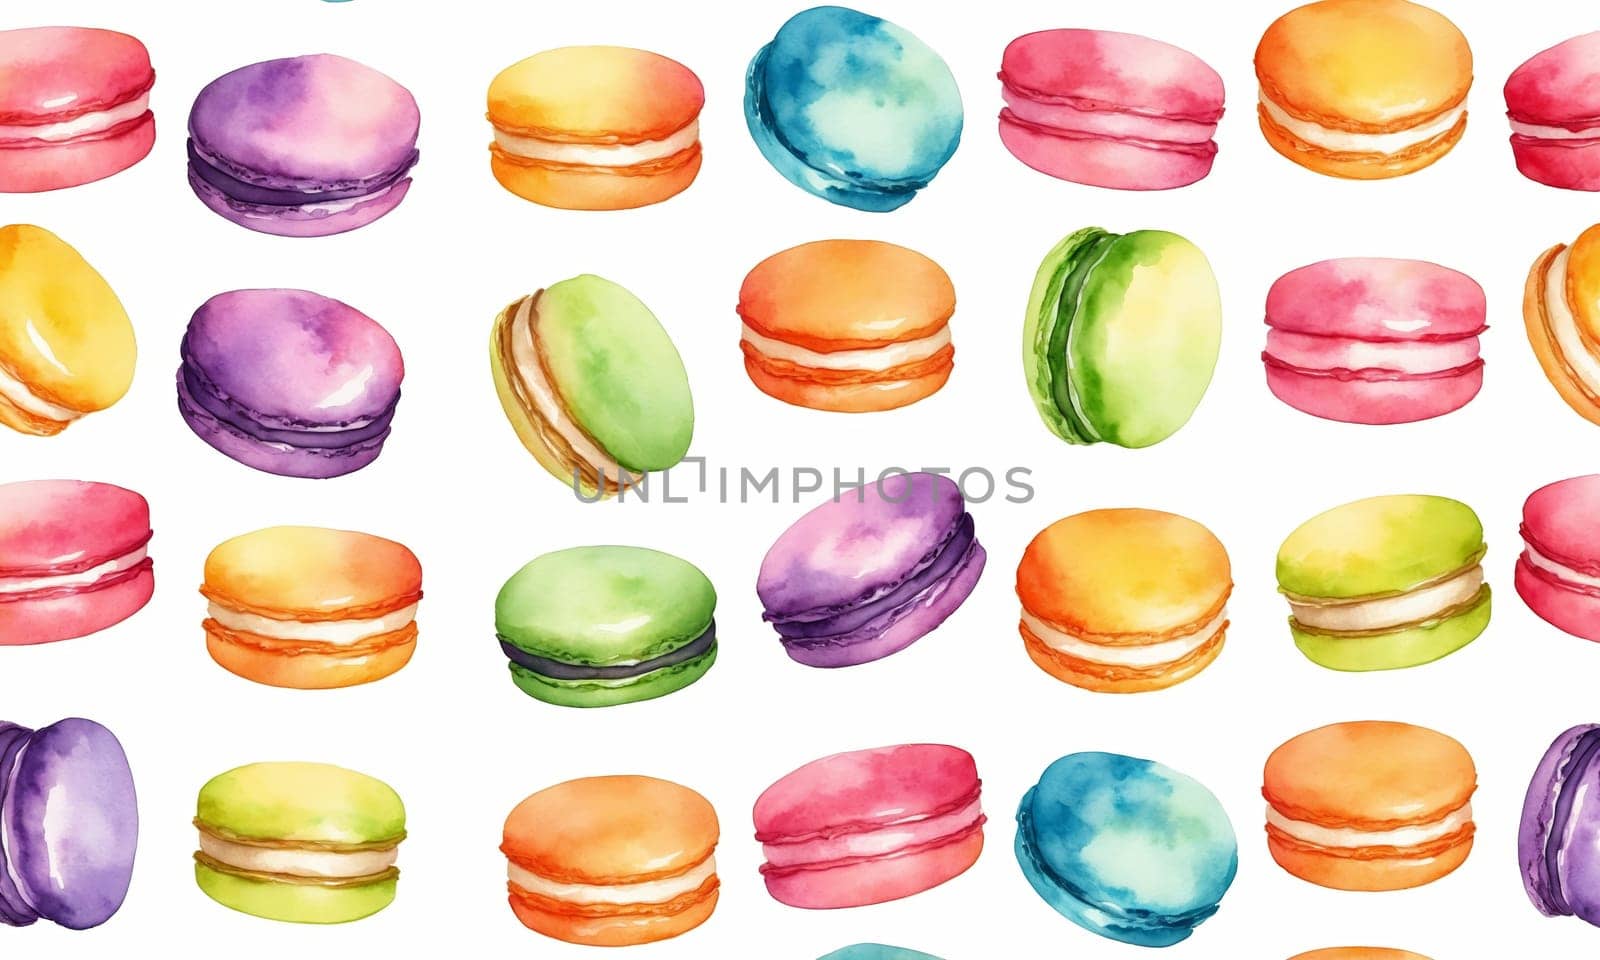 Colorful macaroons with watercolor splashes on white background.